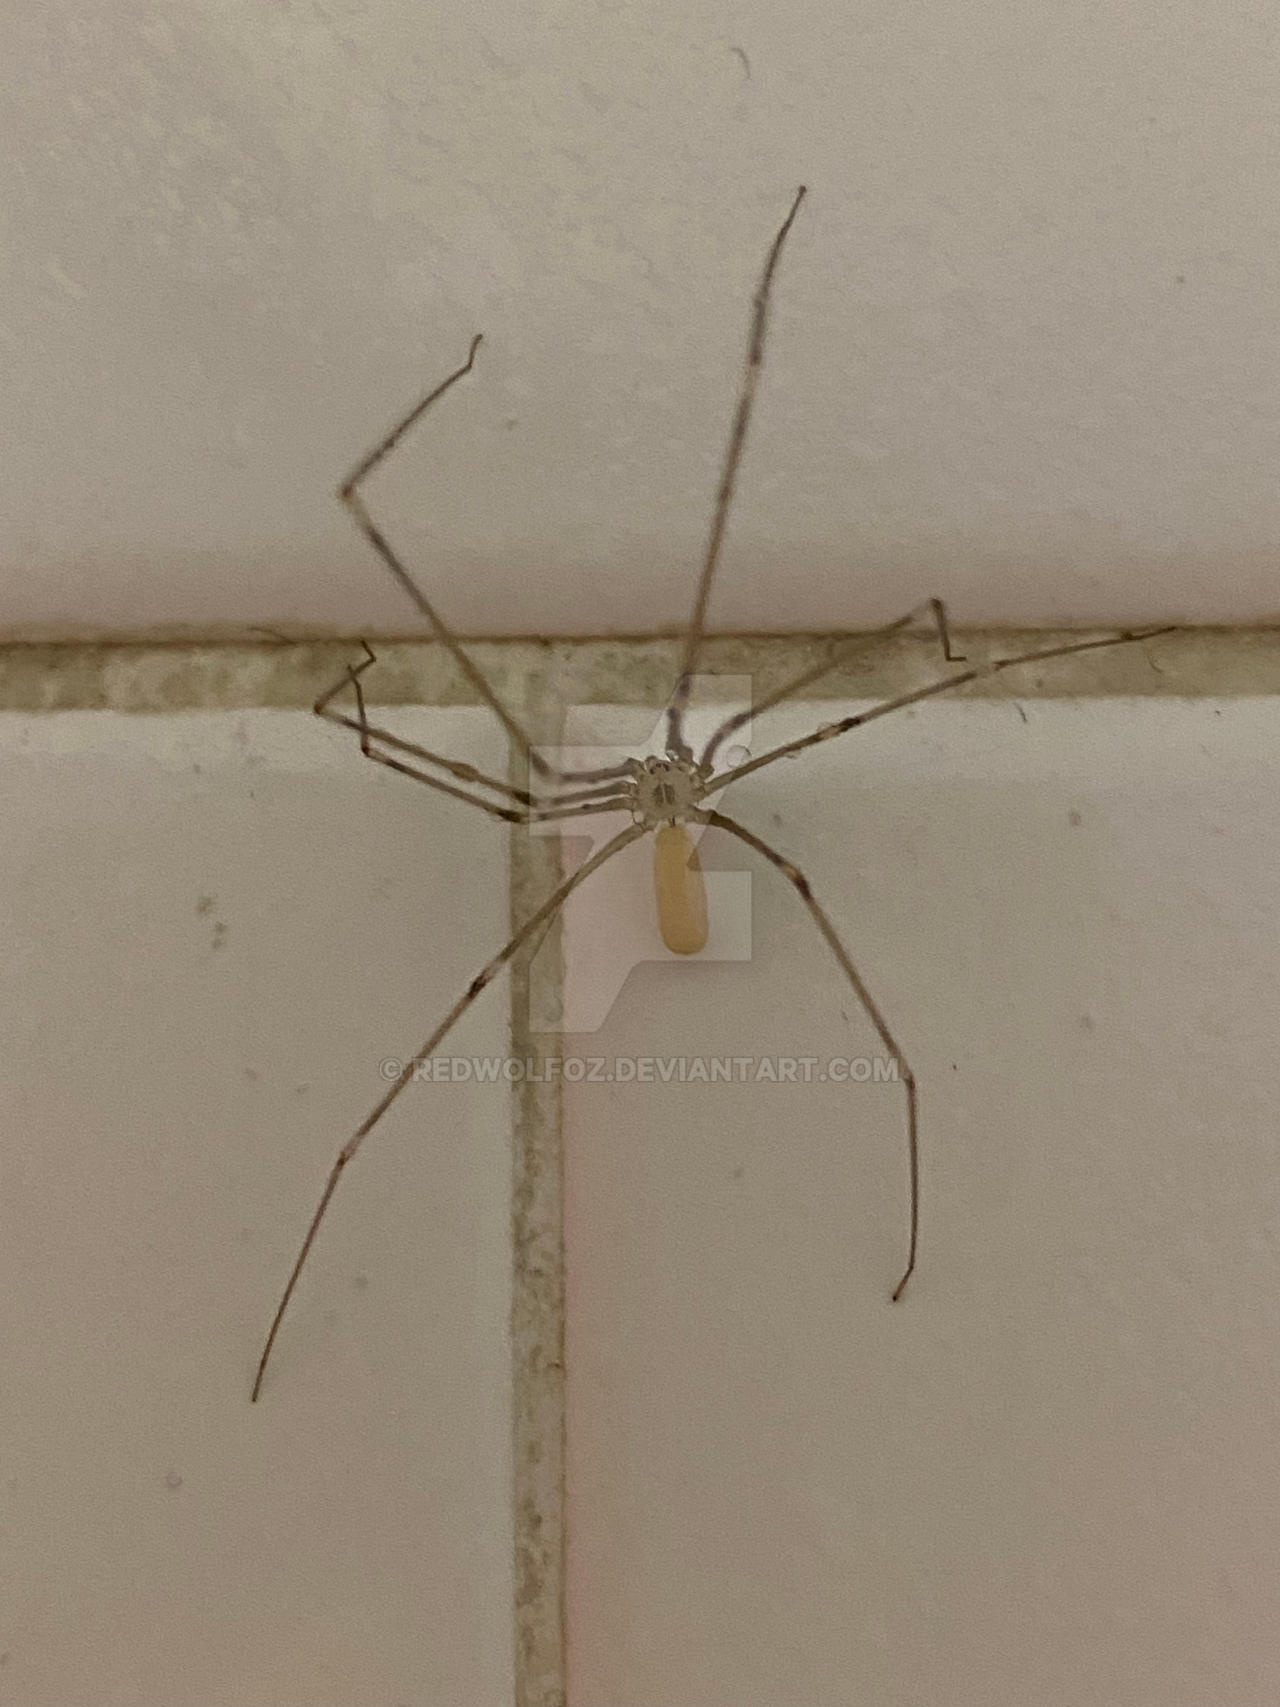 Daddy long legs : r/confusingperspective